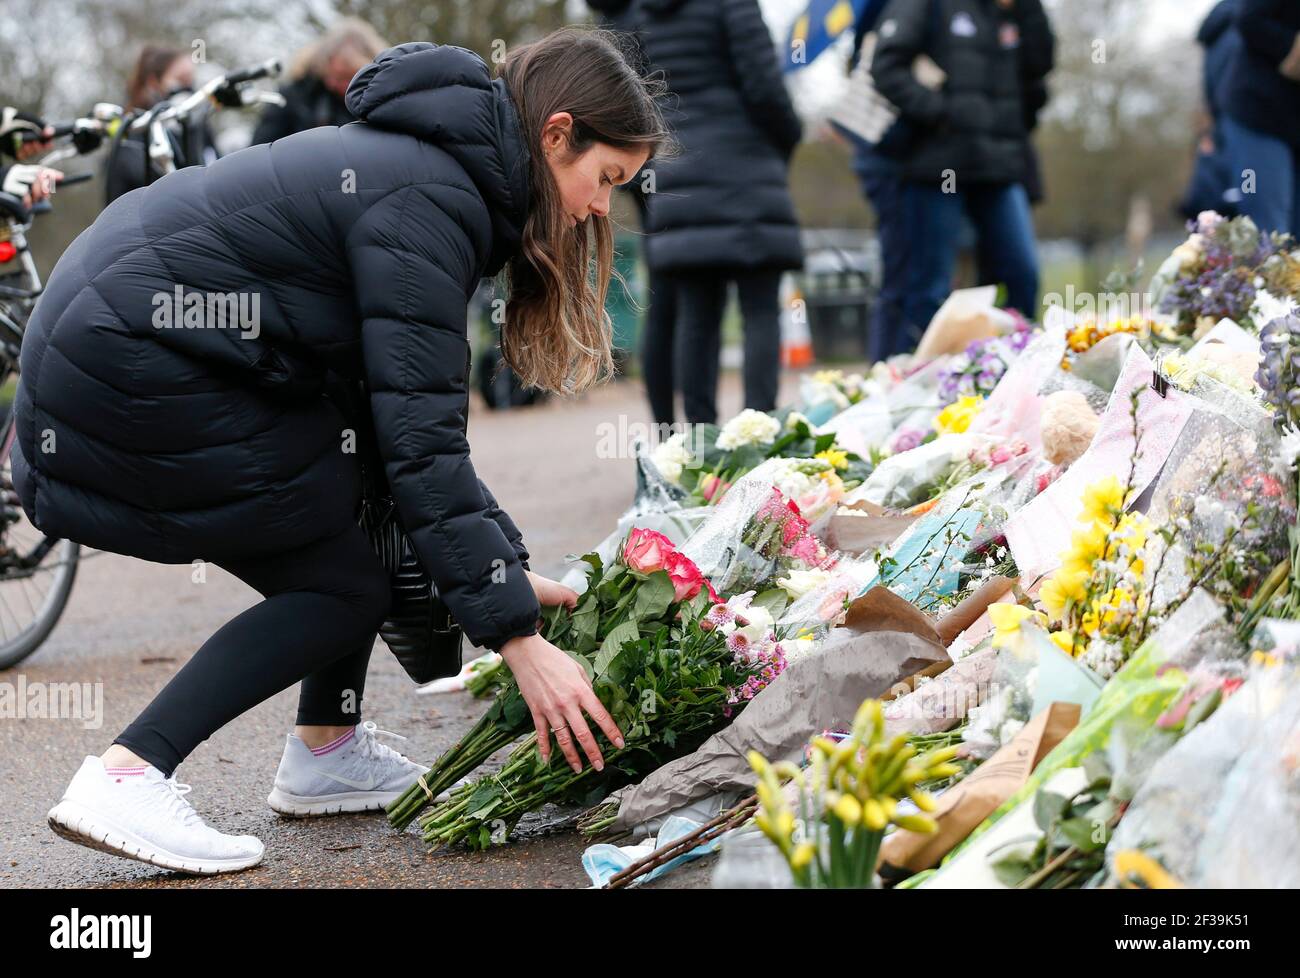 London, UK. 15th Mar, 2021. A woman lays floral tributes at the bandstand on Clapham Common to mourn for Sarah Everard in London, Britain, on March 15, 2021. A serving Metropolitan police officer on March 13 appeared in court in London after being charged with the kidnap and murder of a 33-year-old woman. Wayne Couzens, 48, was arrested after Sarah Everard, a marketing executive, went missing while walking home from a friend's apartment in south London on March 3. Credit: Xinhua/Alamy Live News Stock Photo